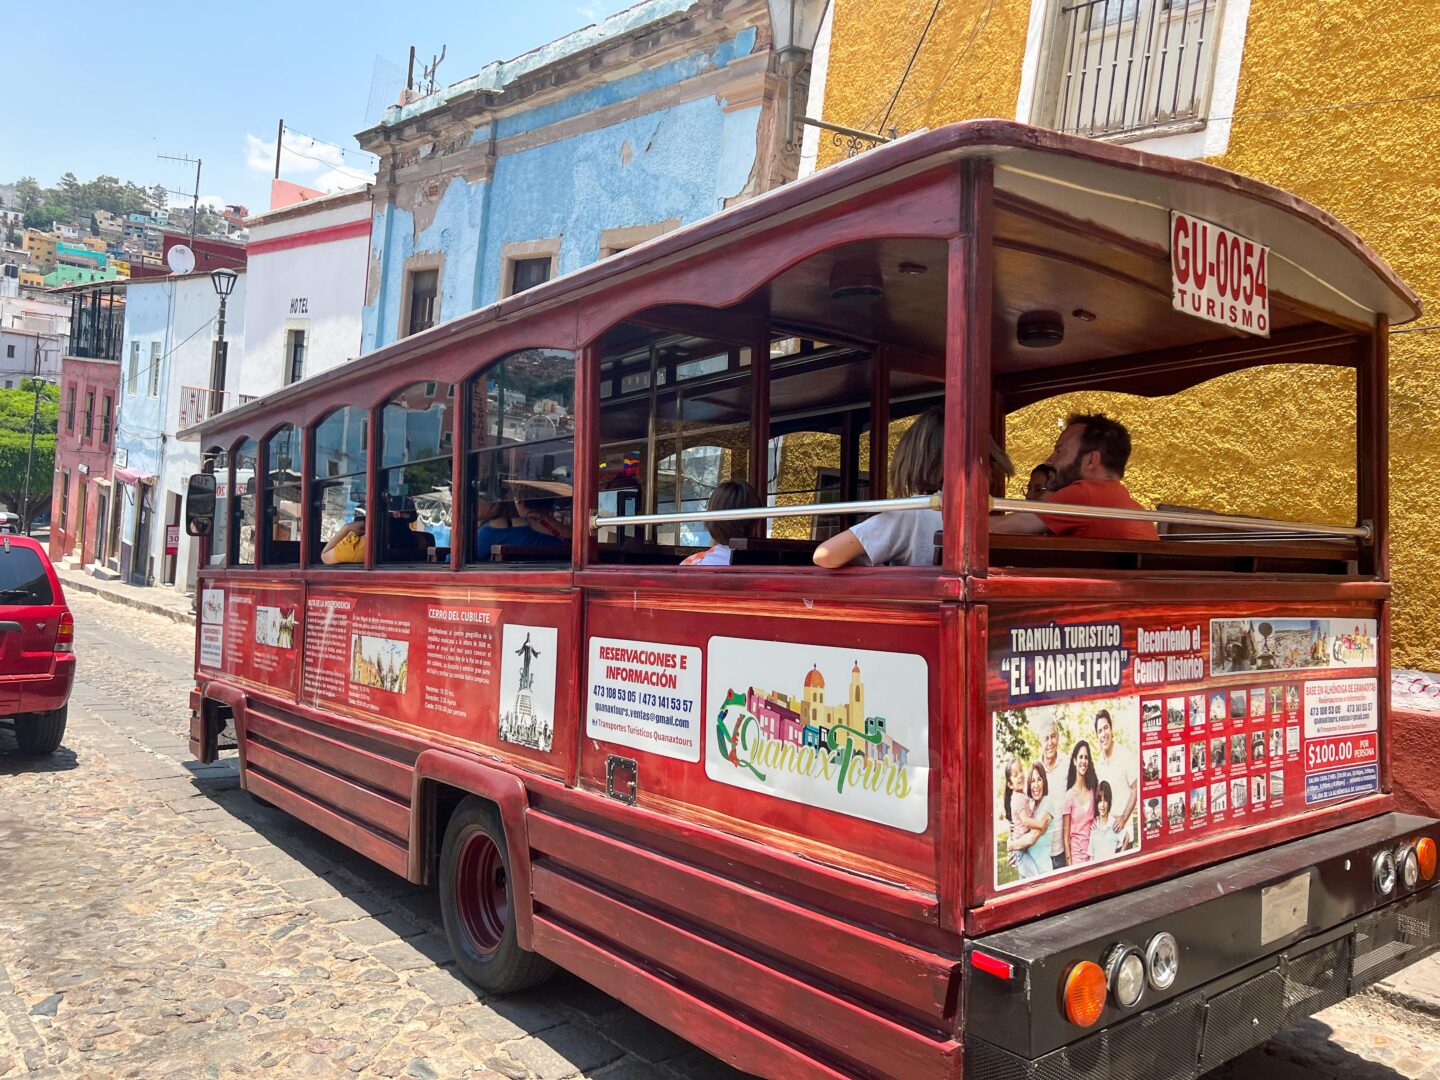 Things to do in Guanajuato Mexico
tourist trolley